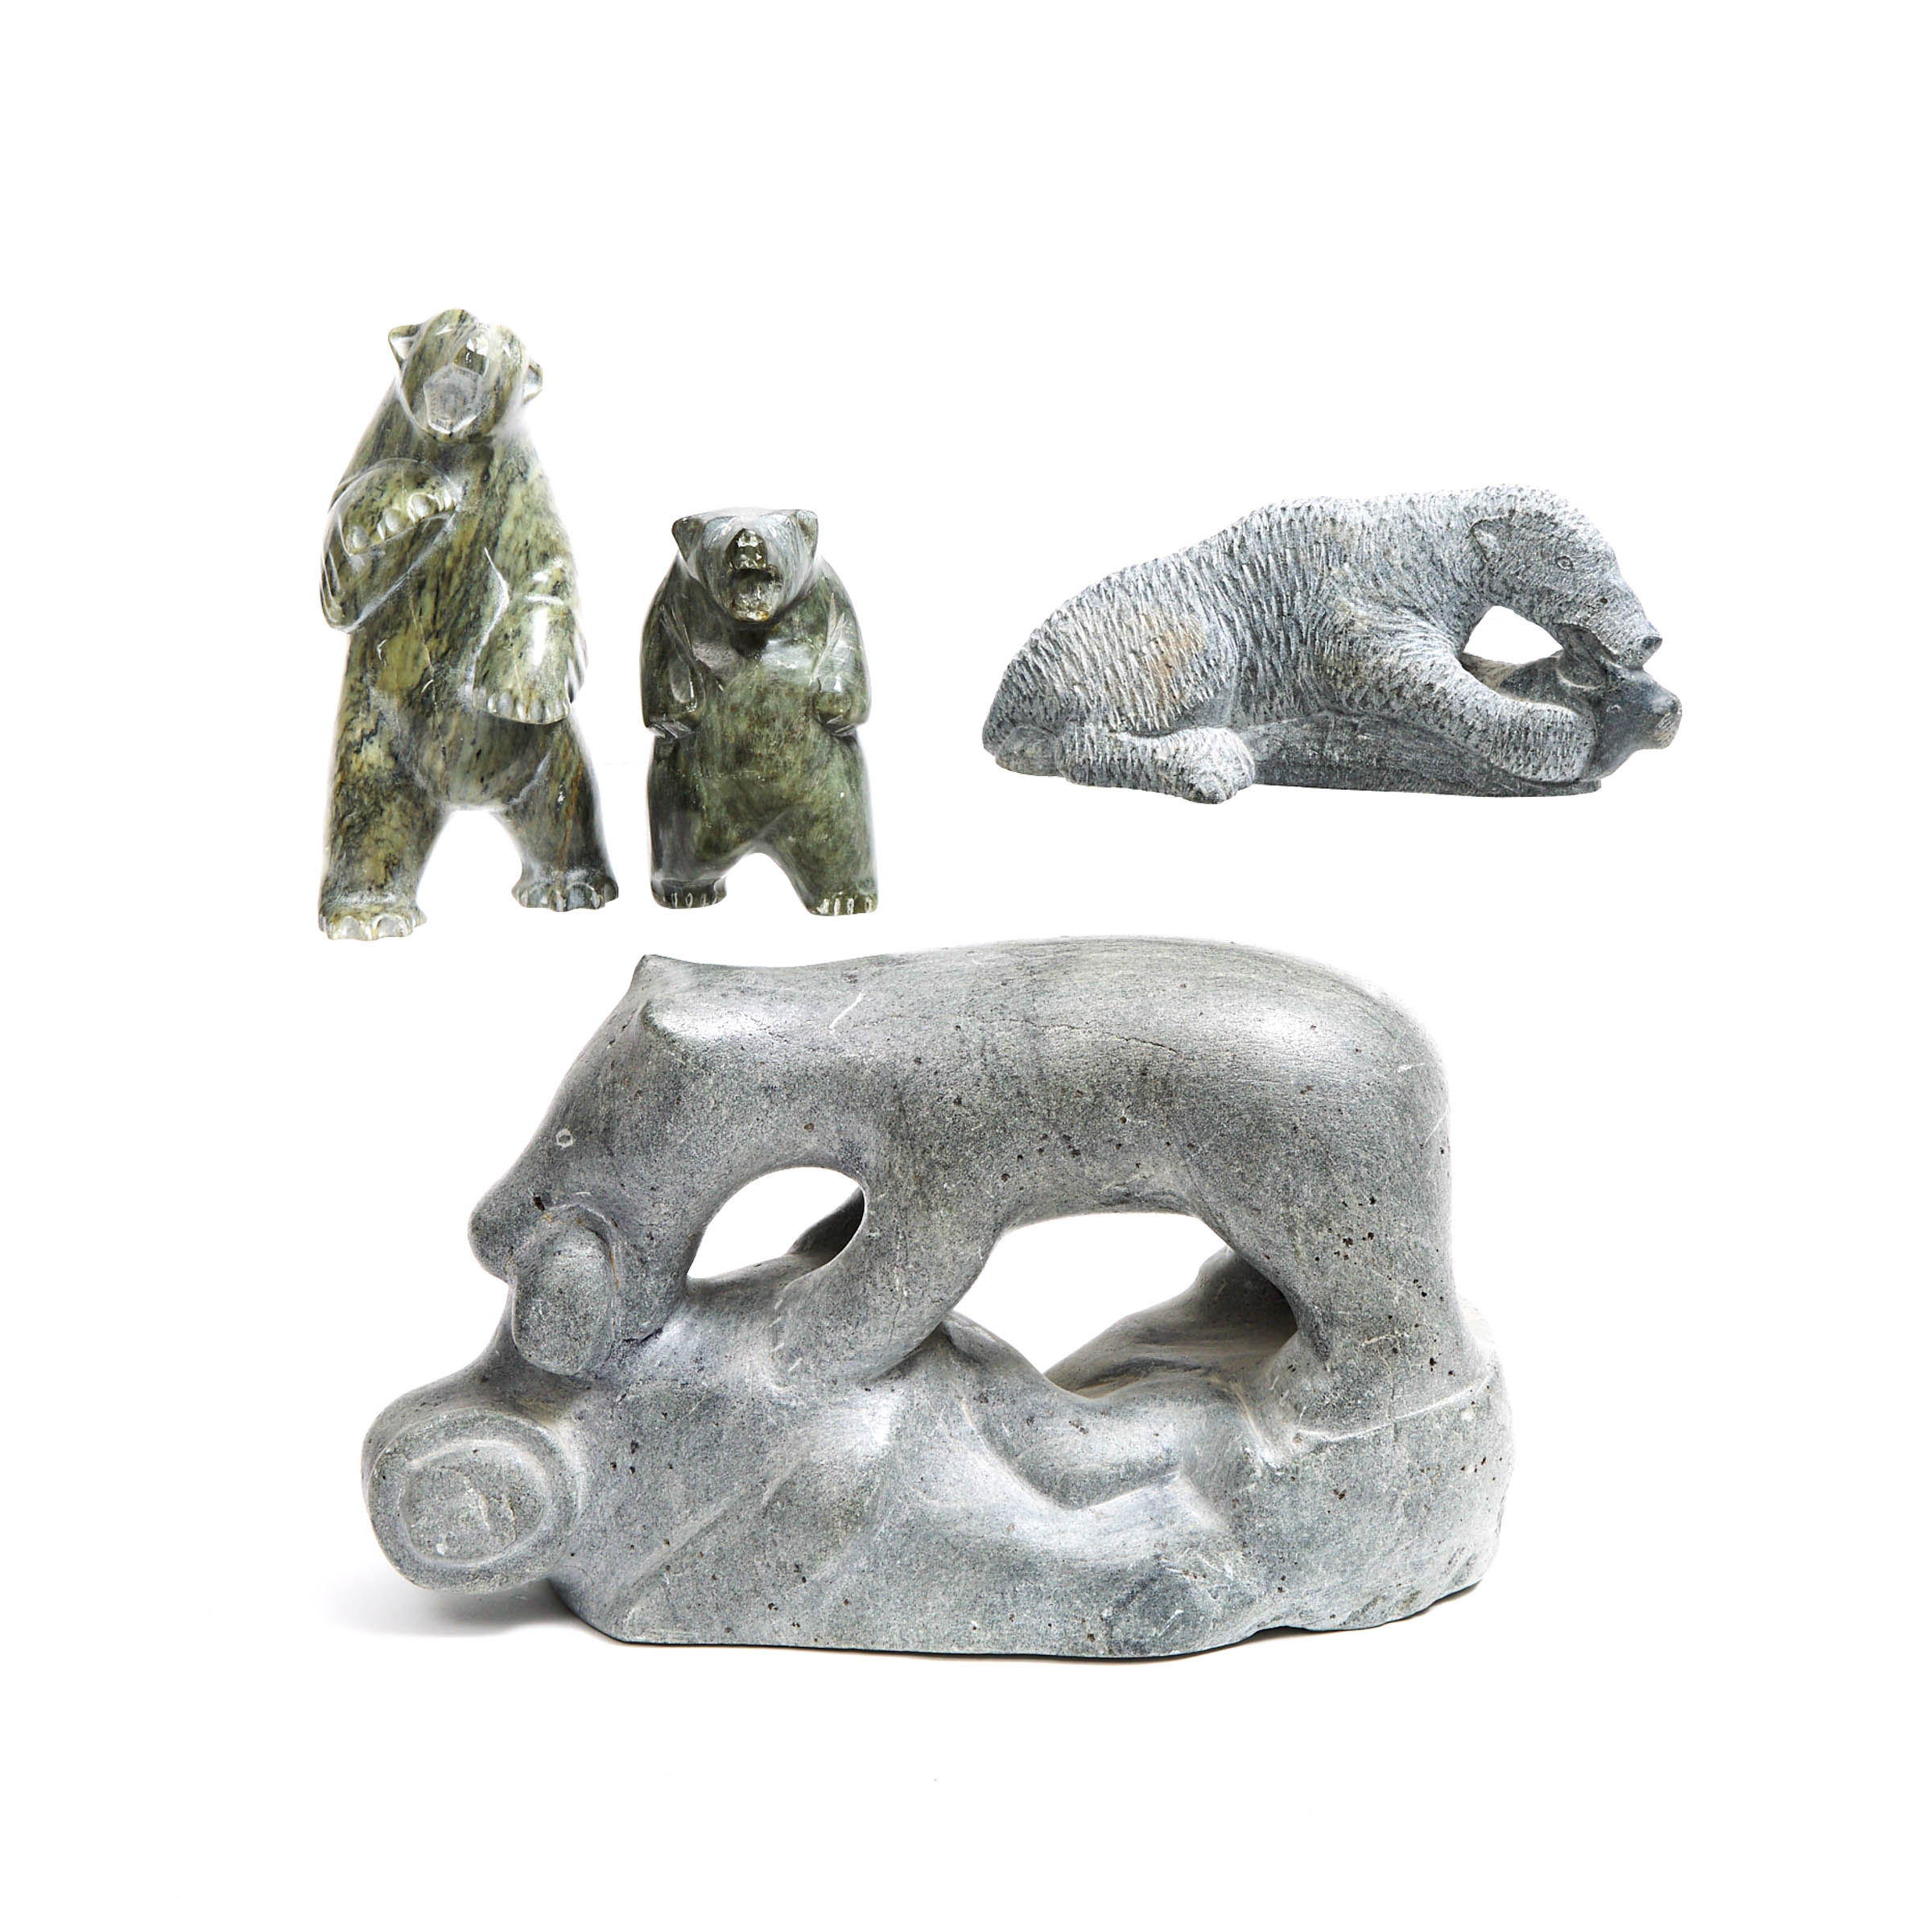  COLLECTION OF FOUR INUIT SCULPTURES OF POLAR BEARS